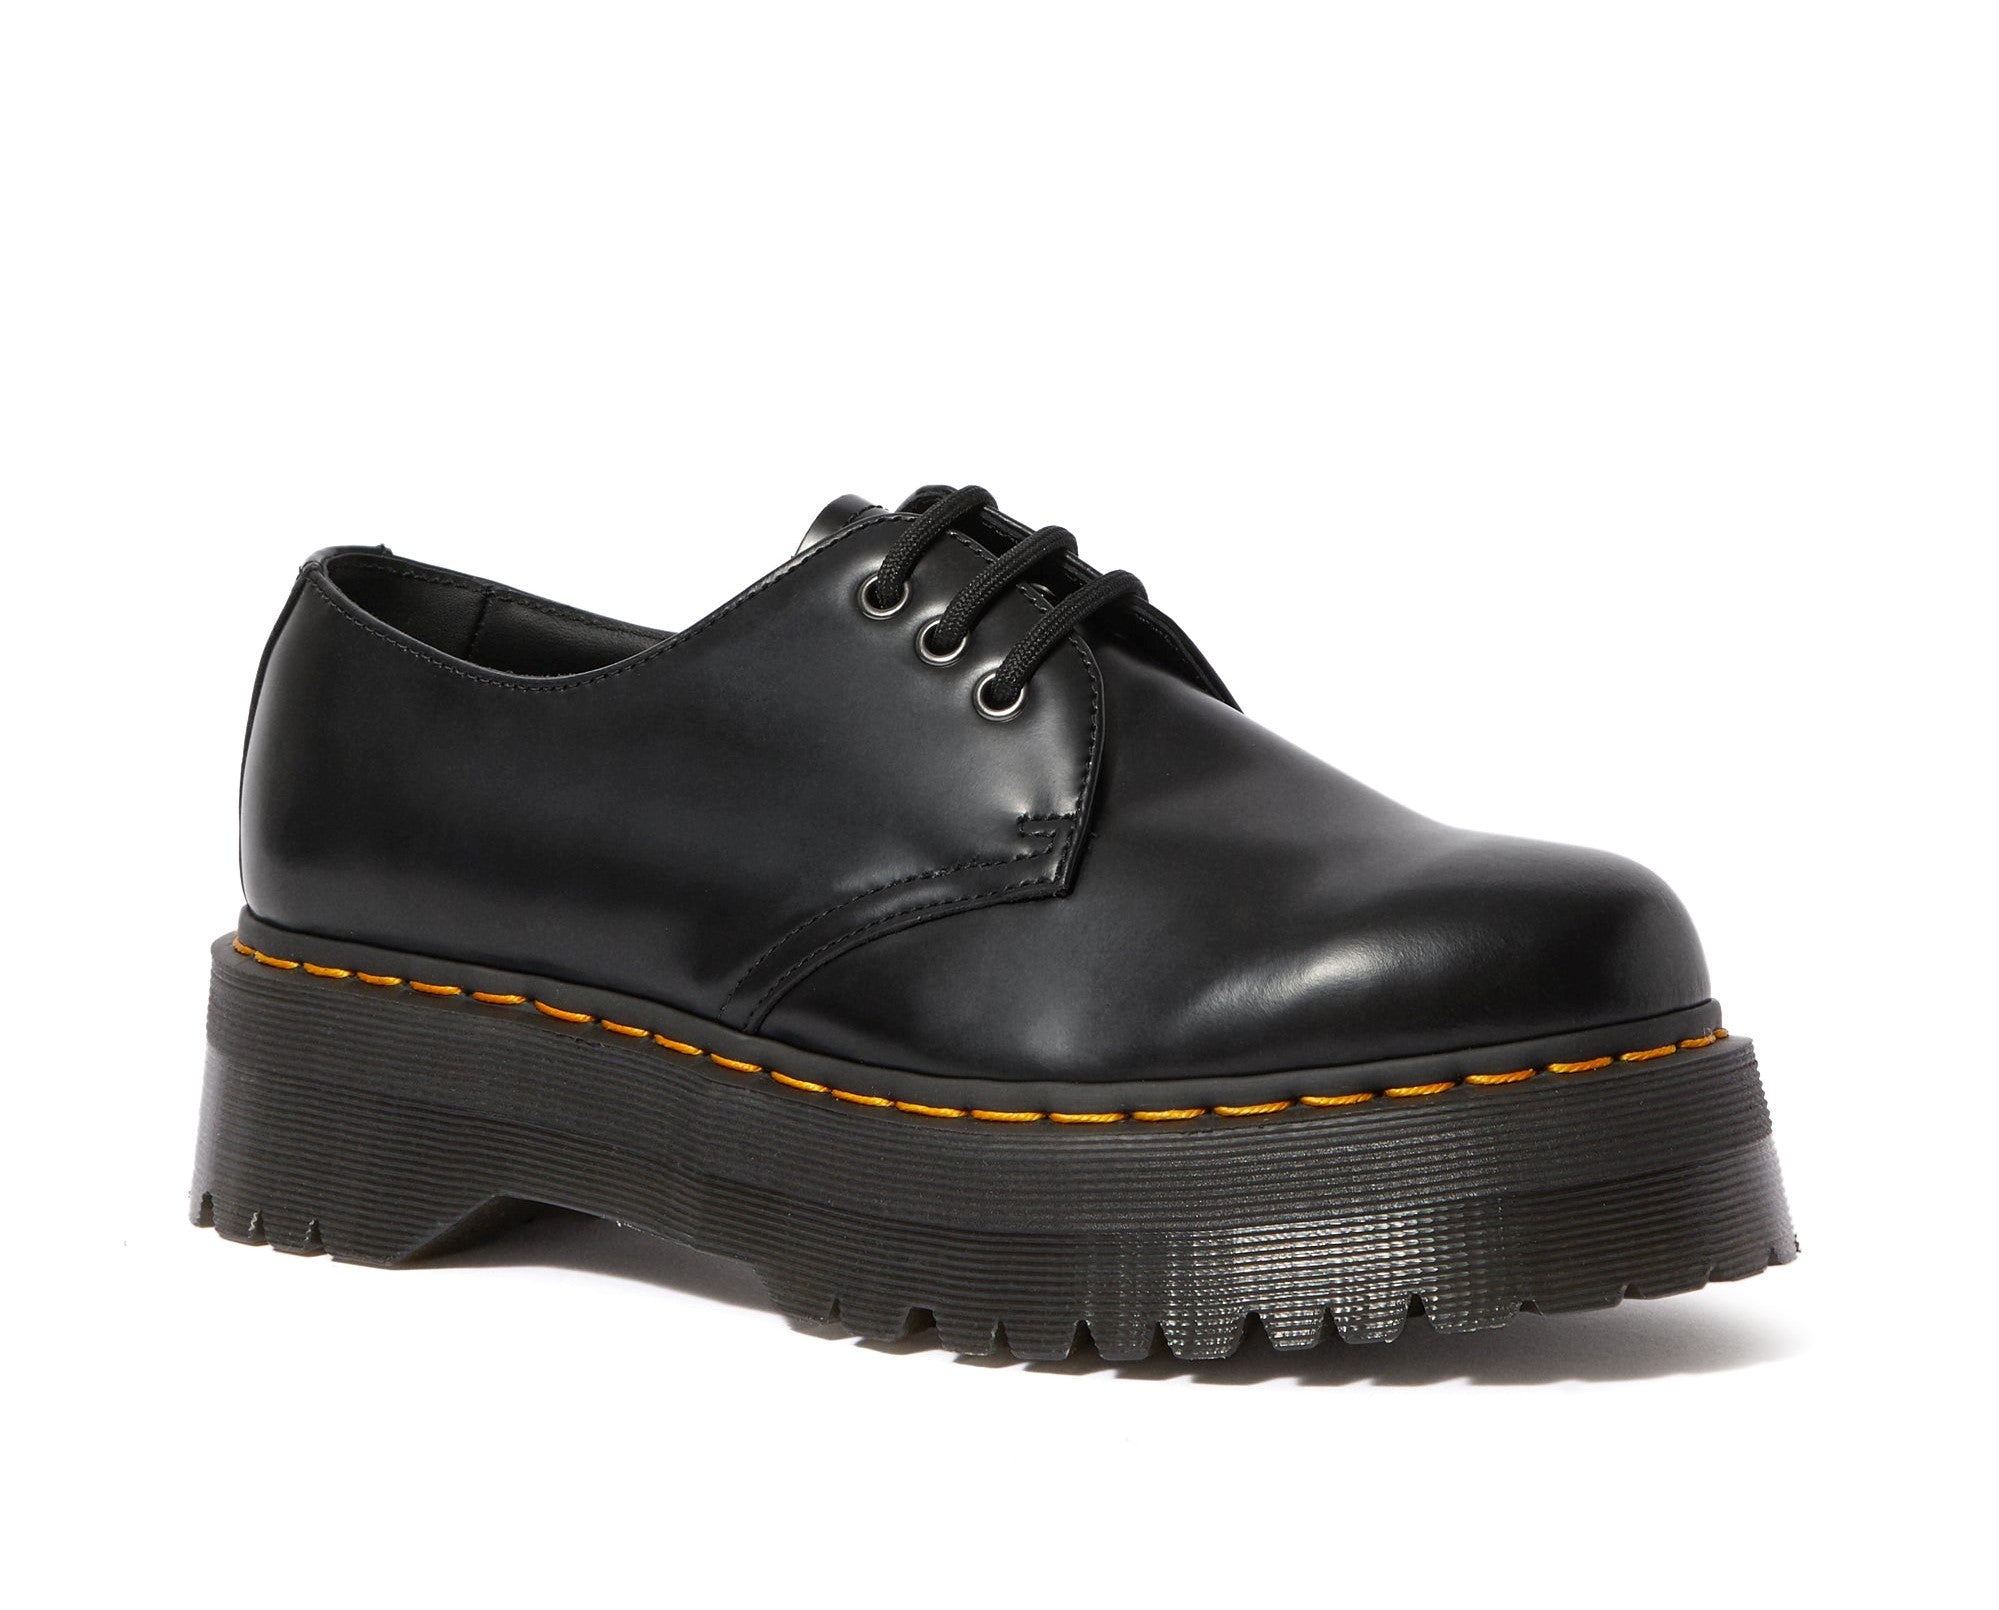 1461 Smooth Leather Platform Shoes in Black